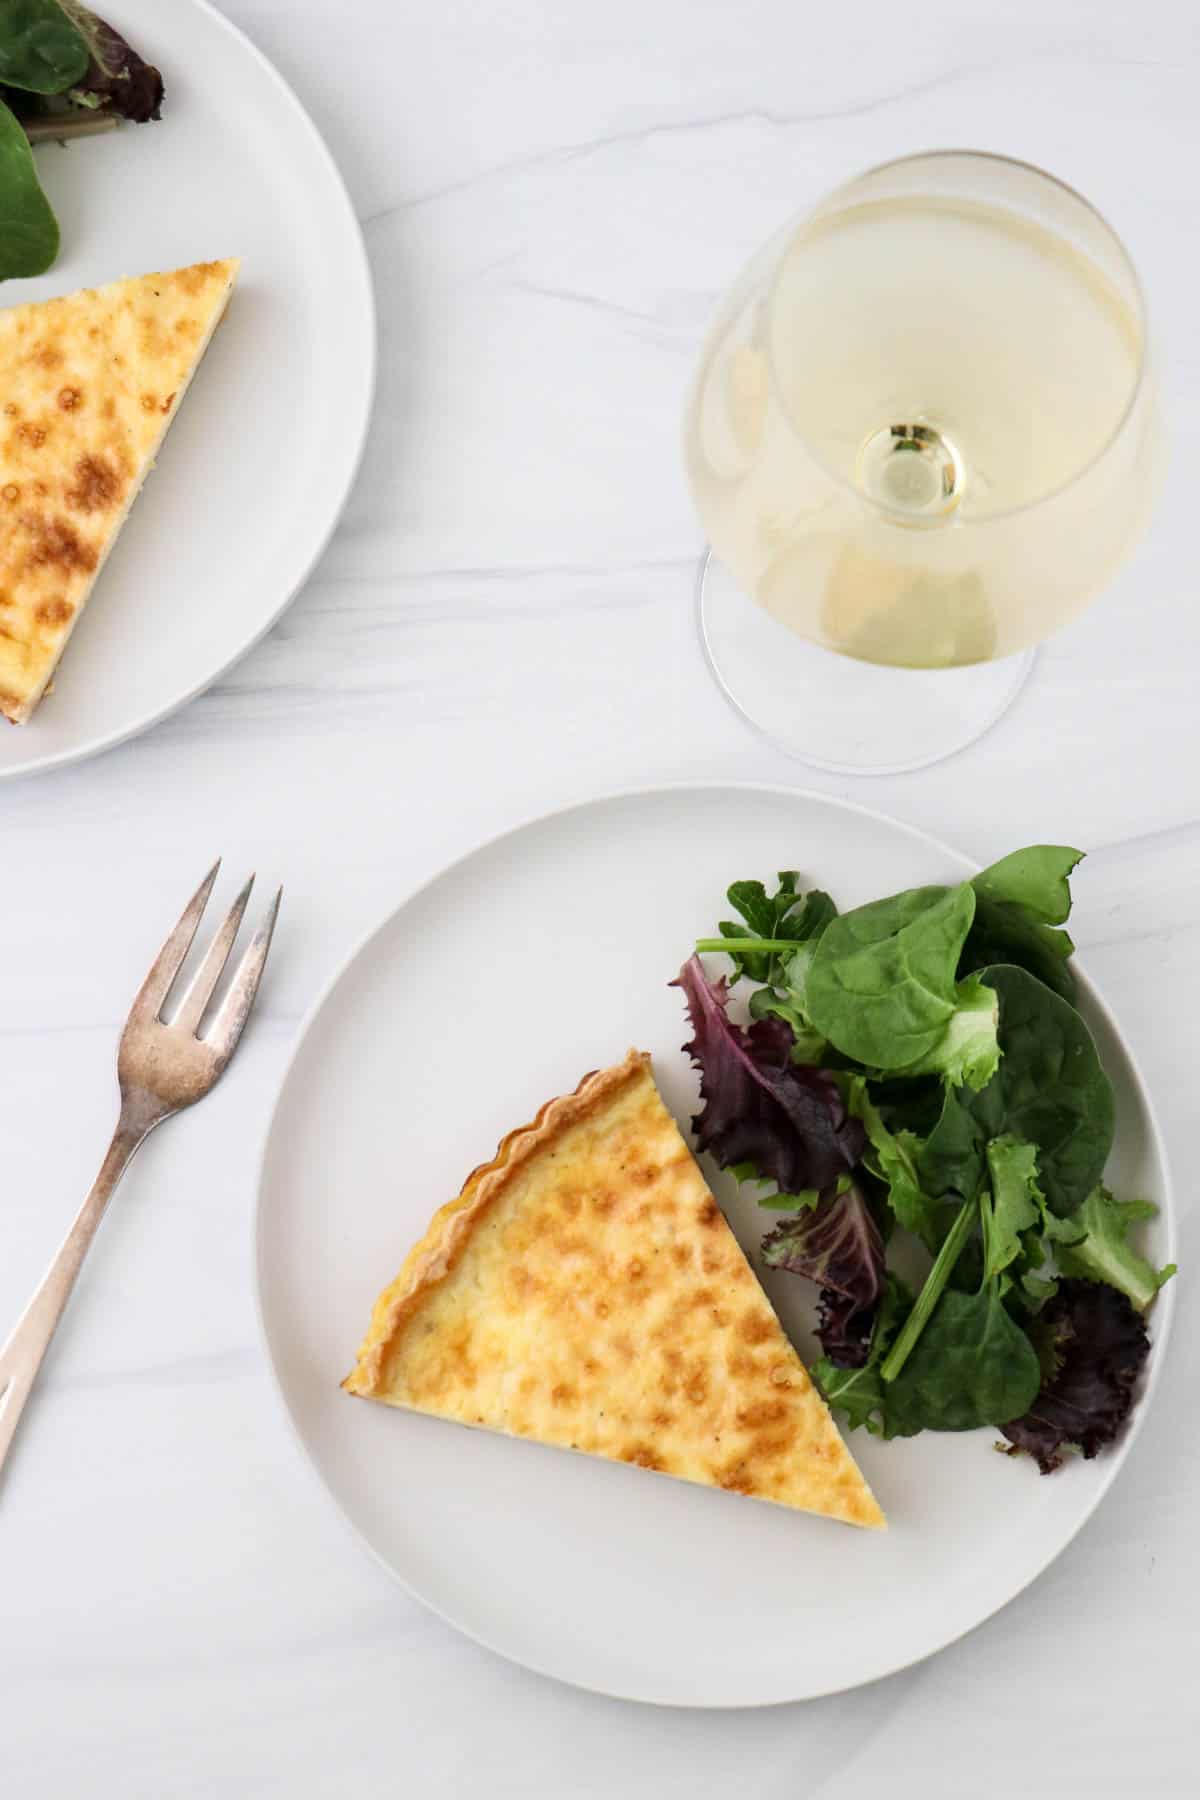 Swedish Cheese Pie (Västerbottenpaj) on a plate with salad next to a glass of wine and fork.